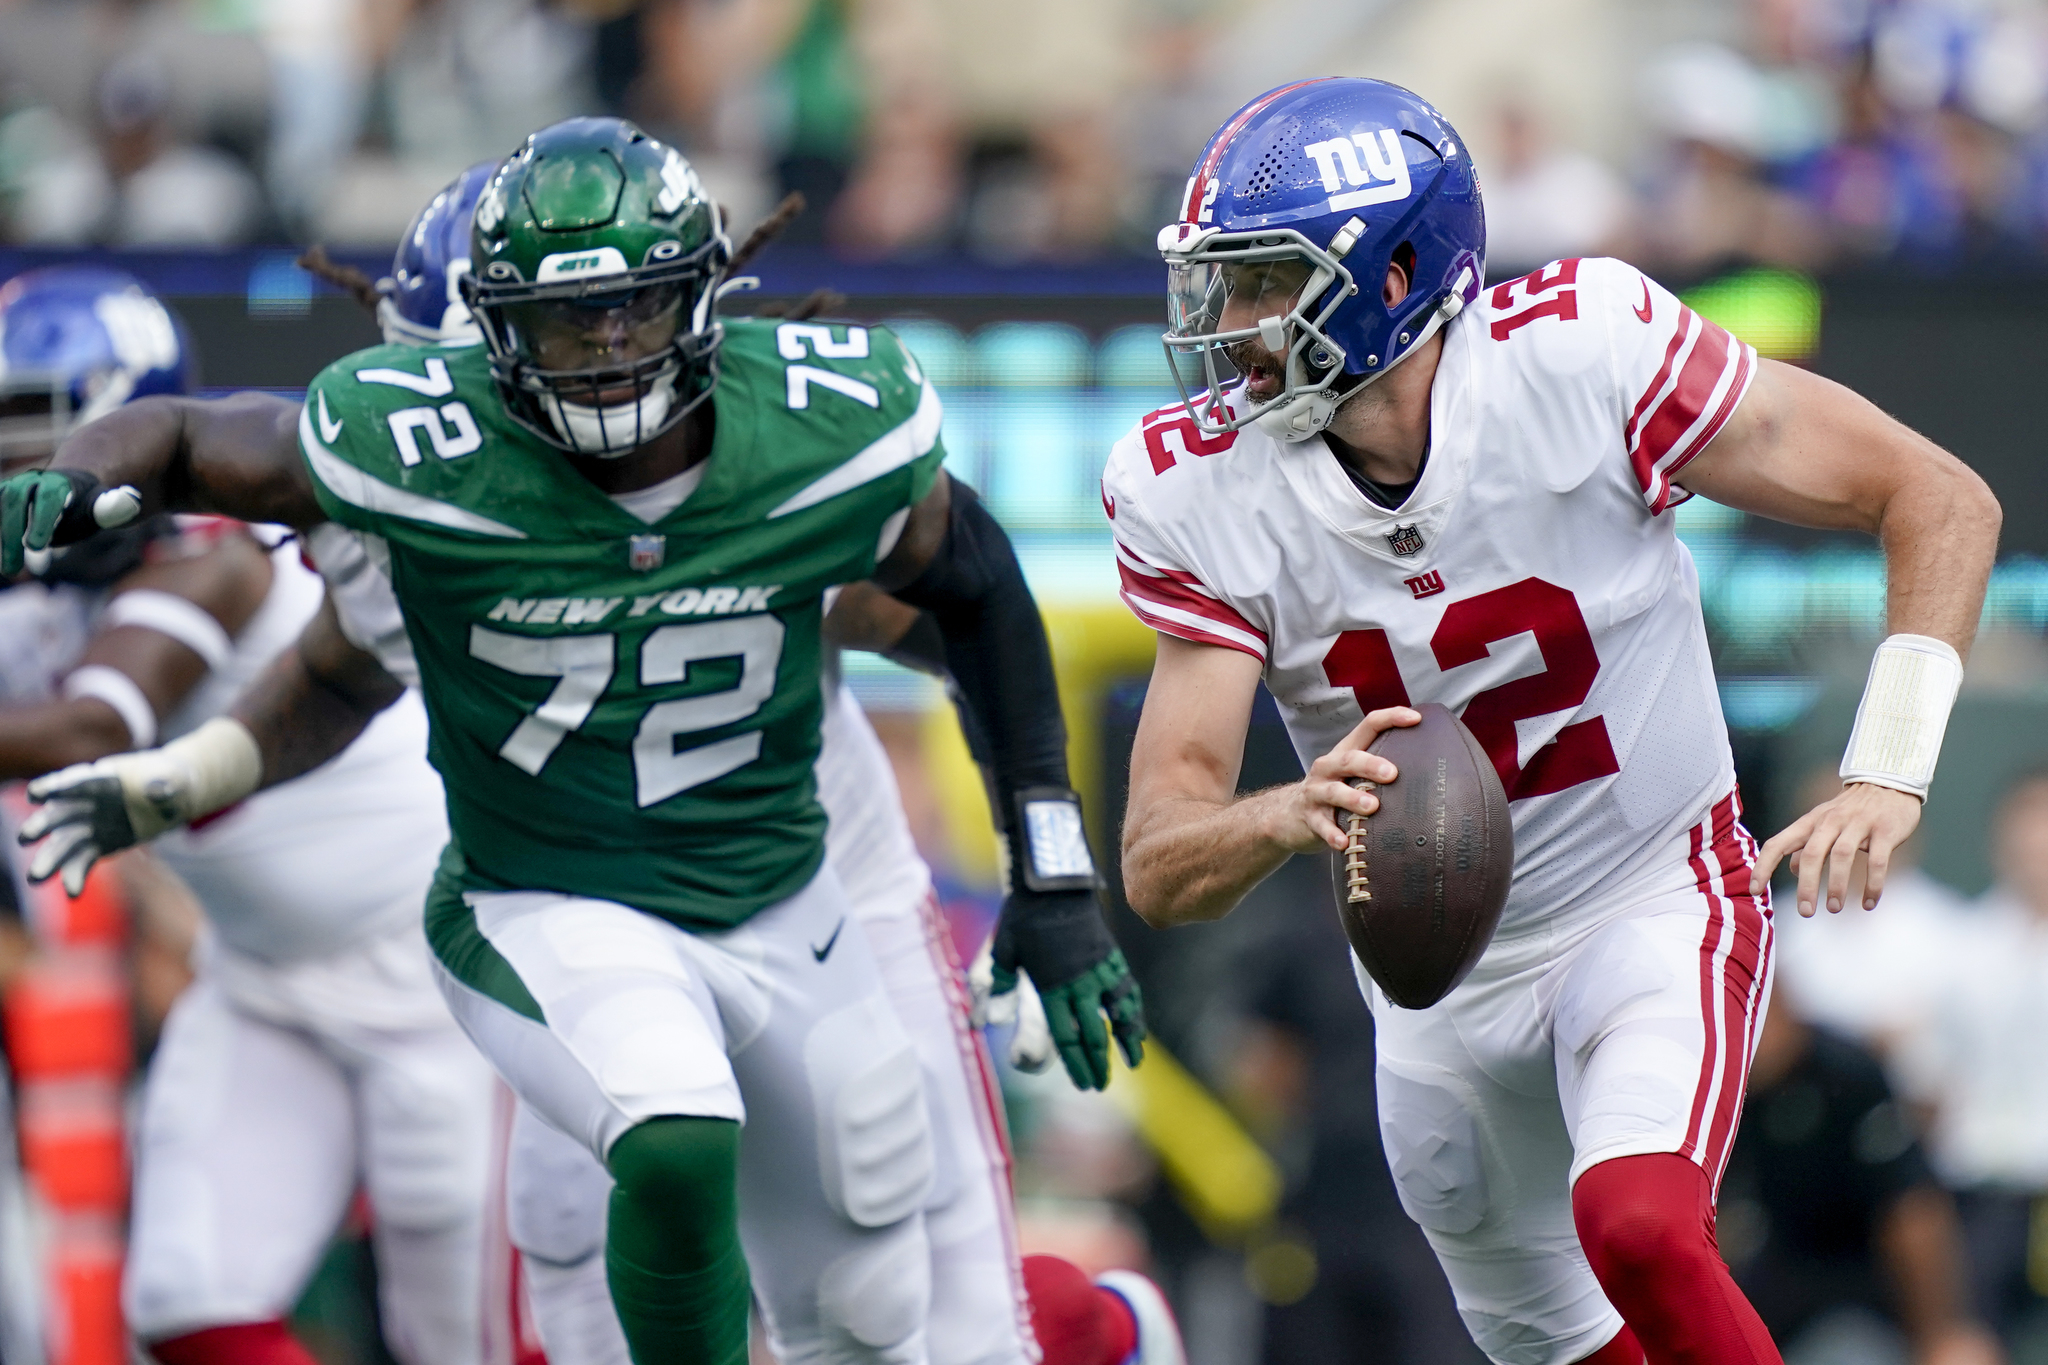 New York Giants quarterback looks to pass on the run in the second half of a preseason NFL football game against the Jets.